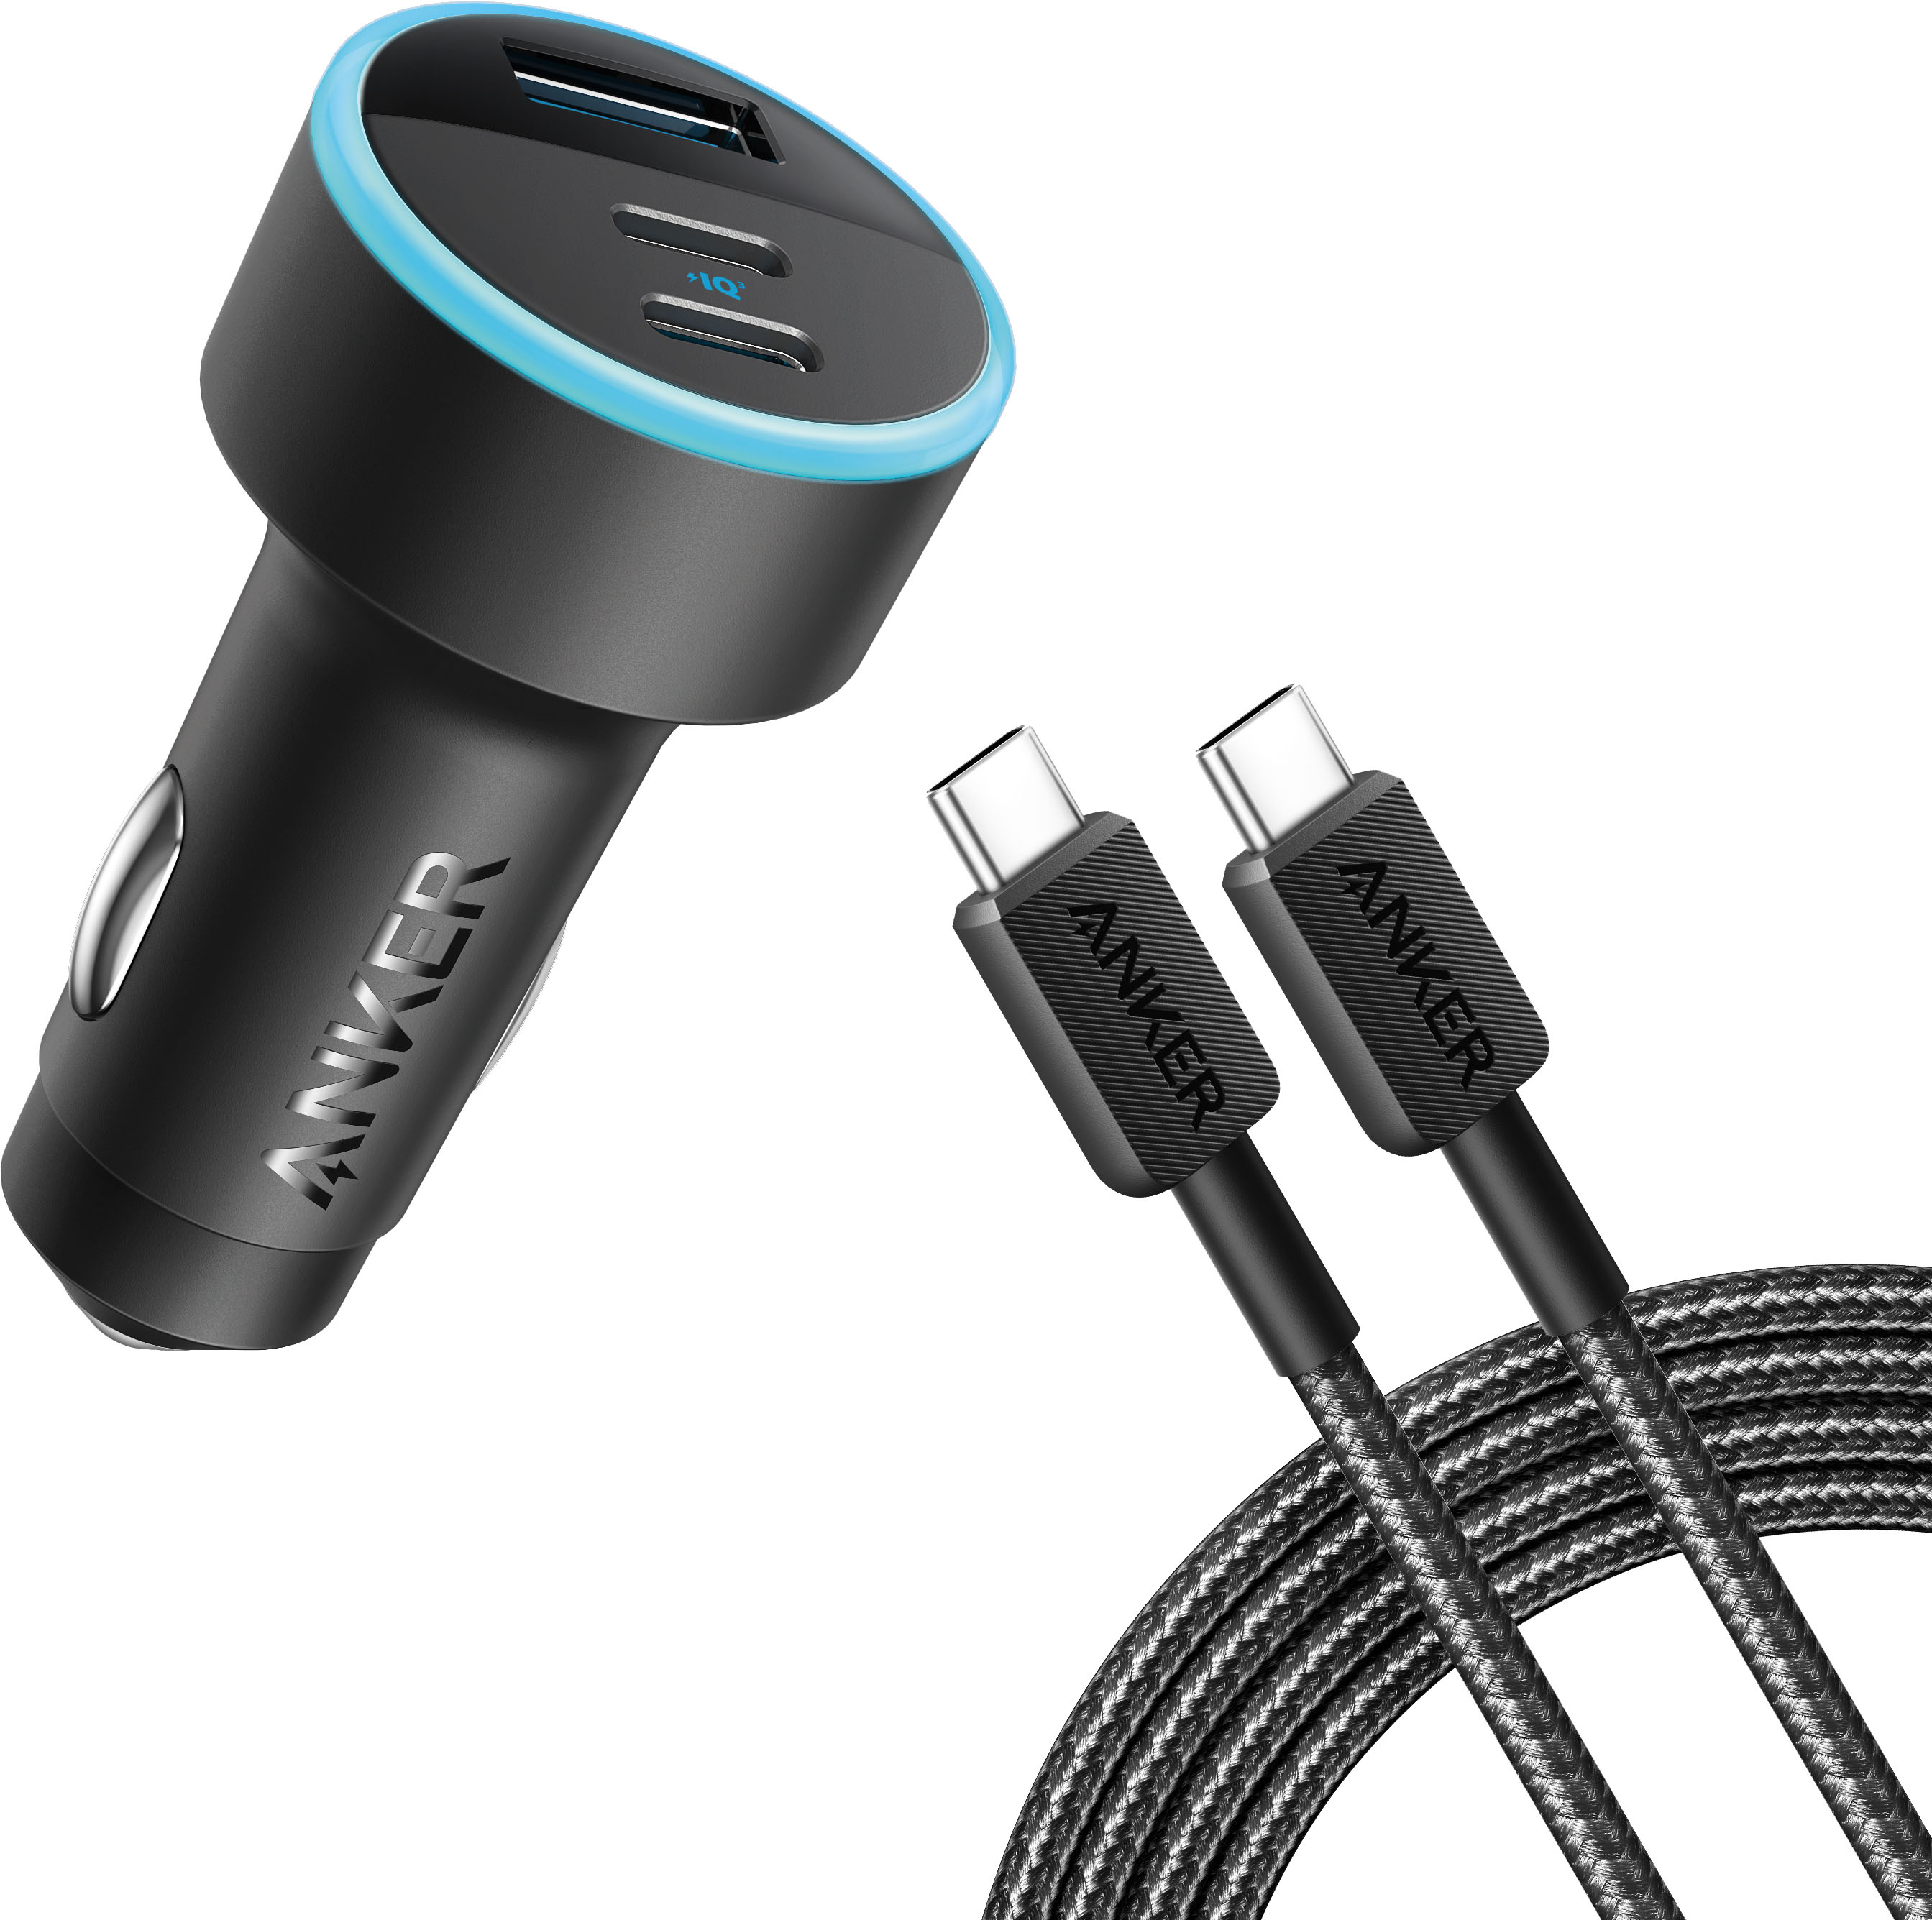 Anker Powerdrive Speed Plus 2 Car Charger Price is Best